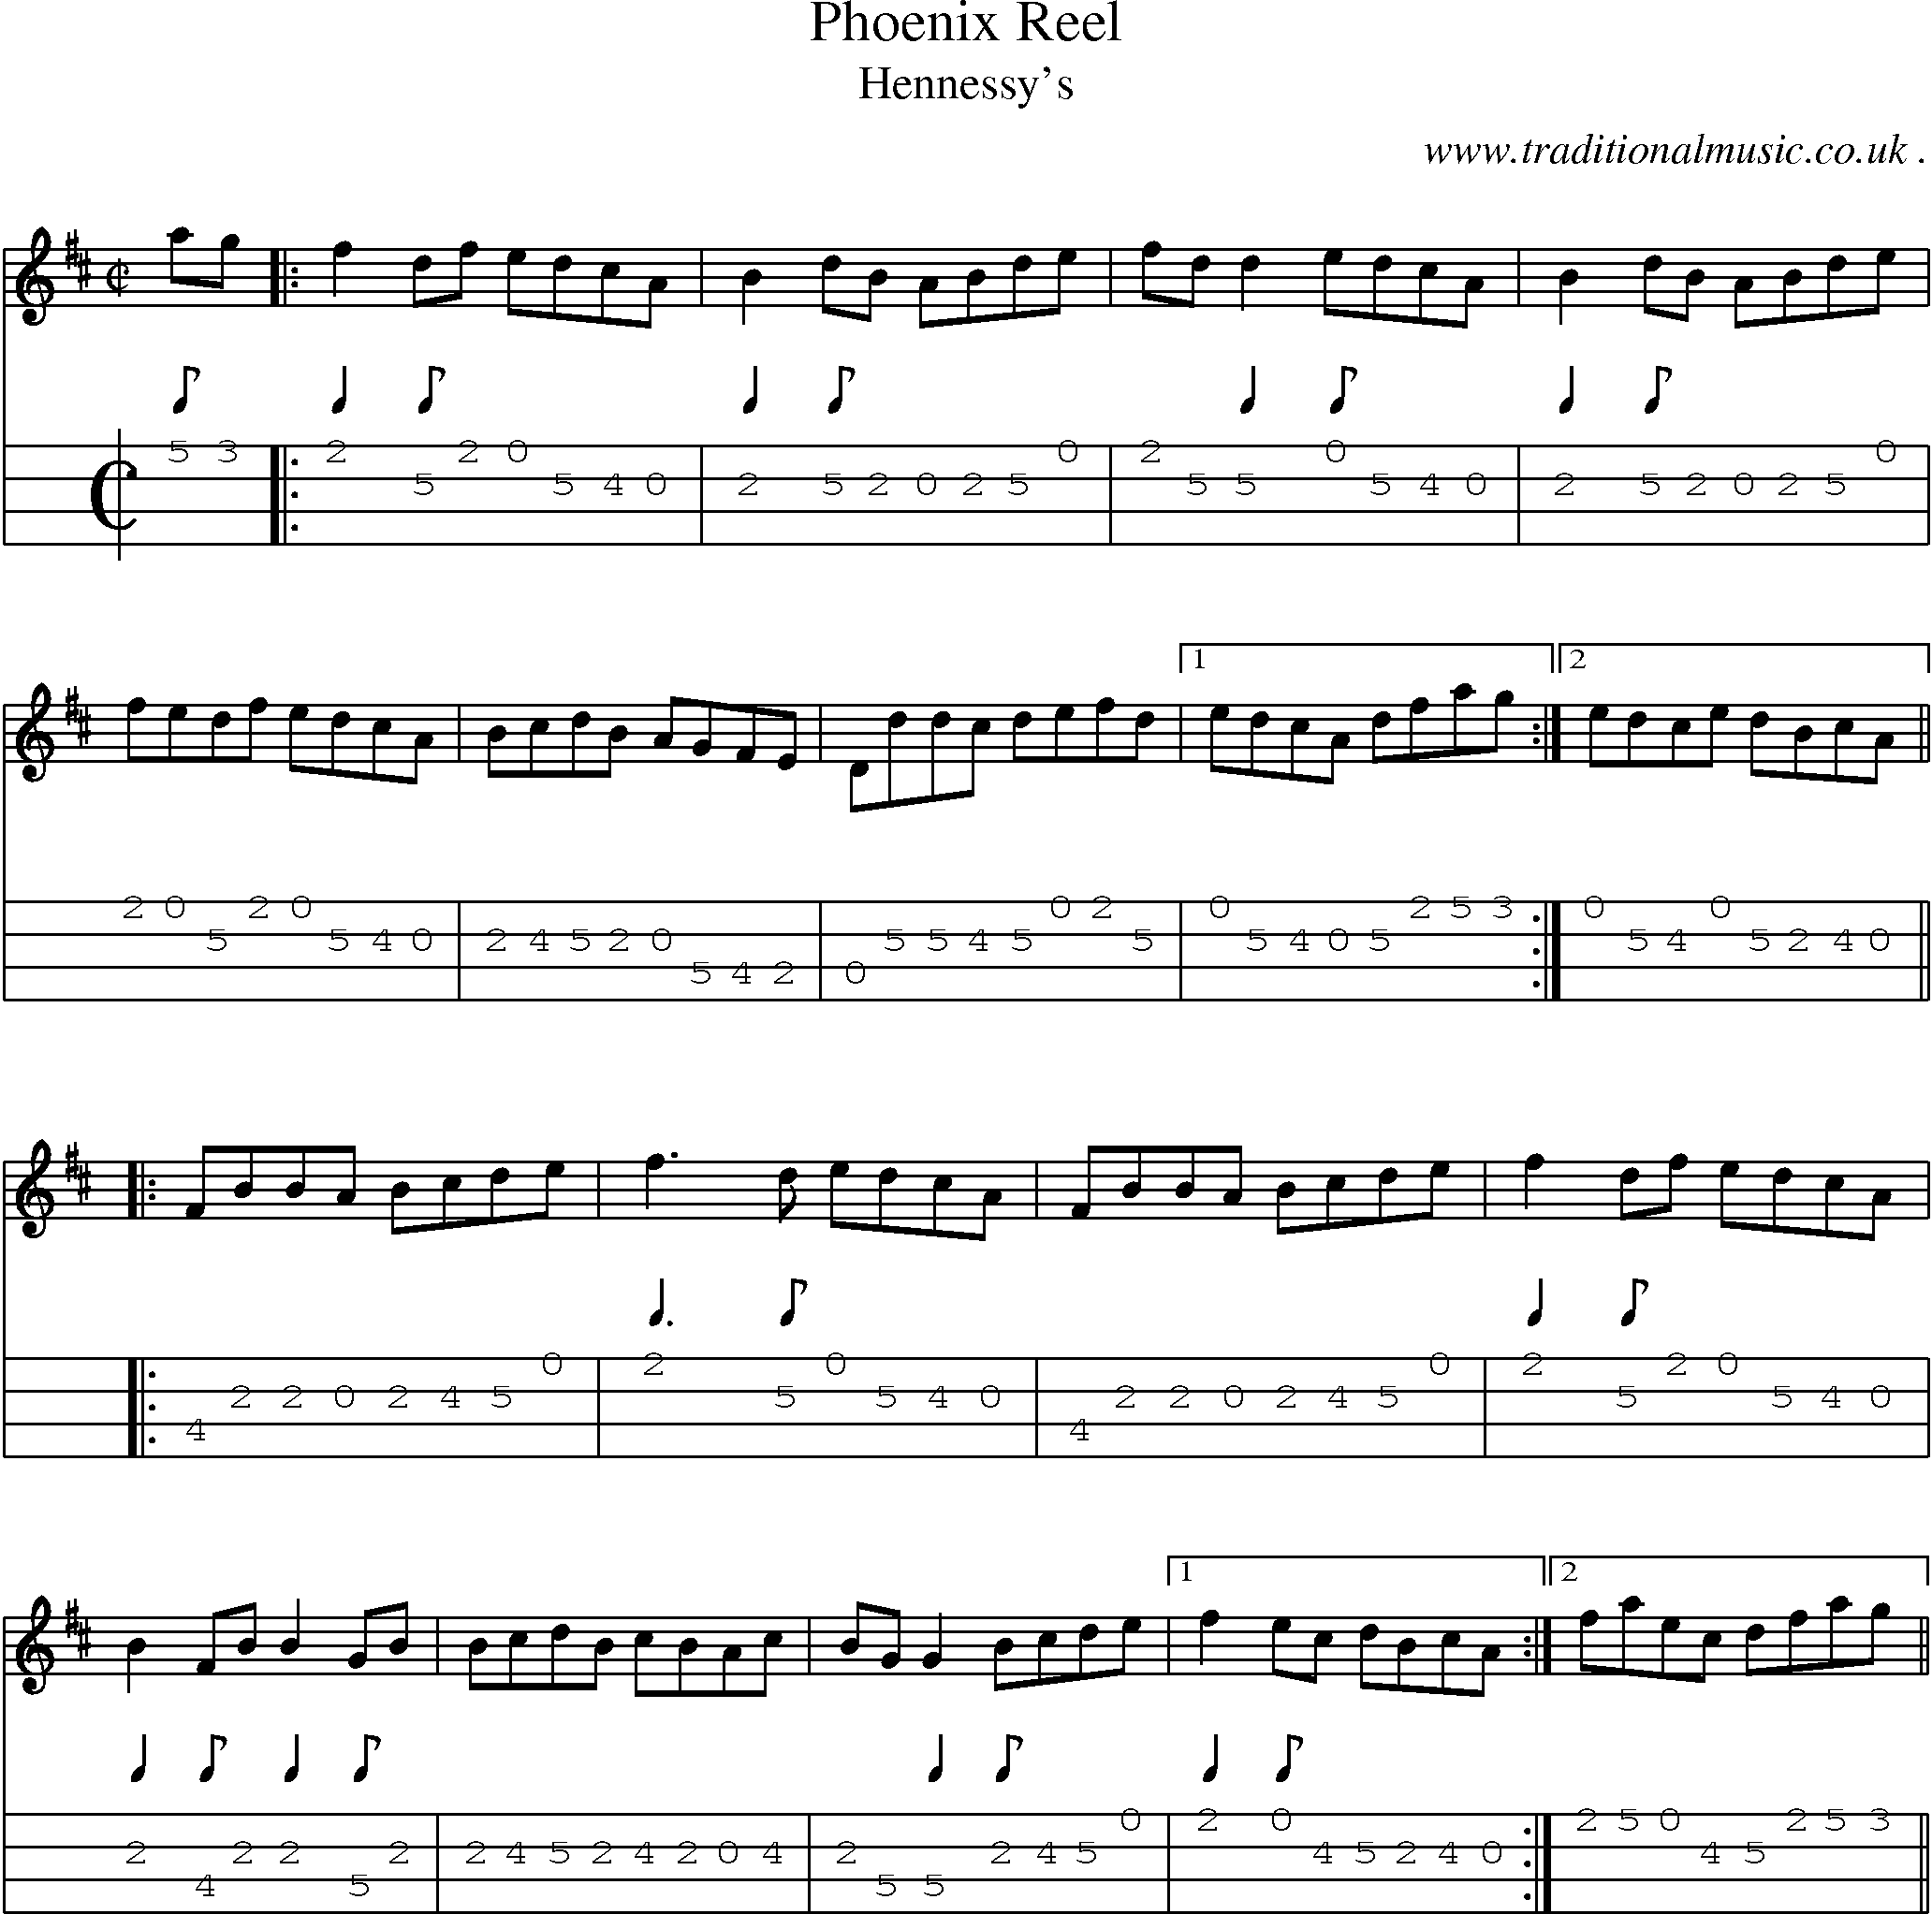 Sheet-Music and Mandolin Tabs for Phoenix Reel